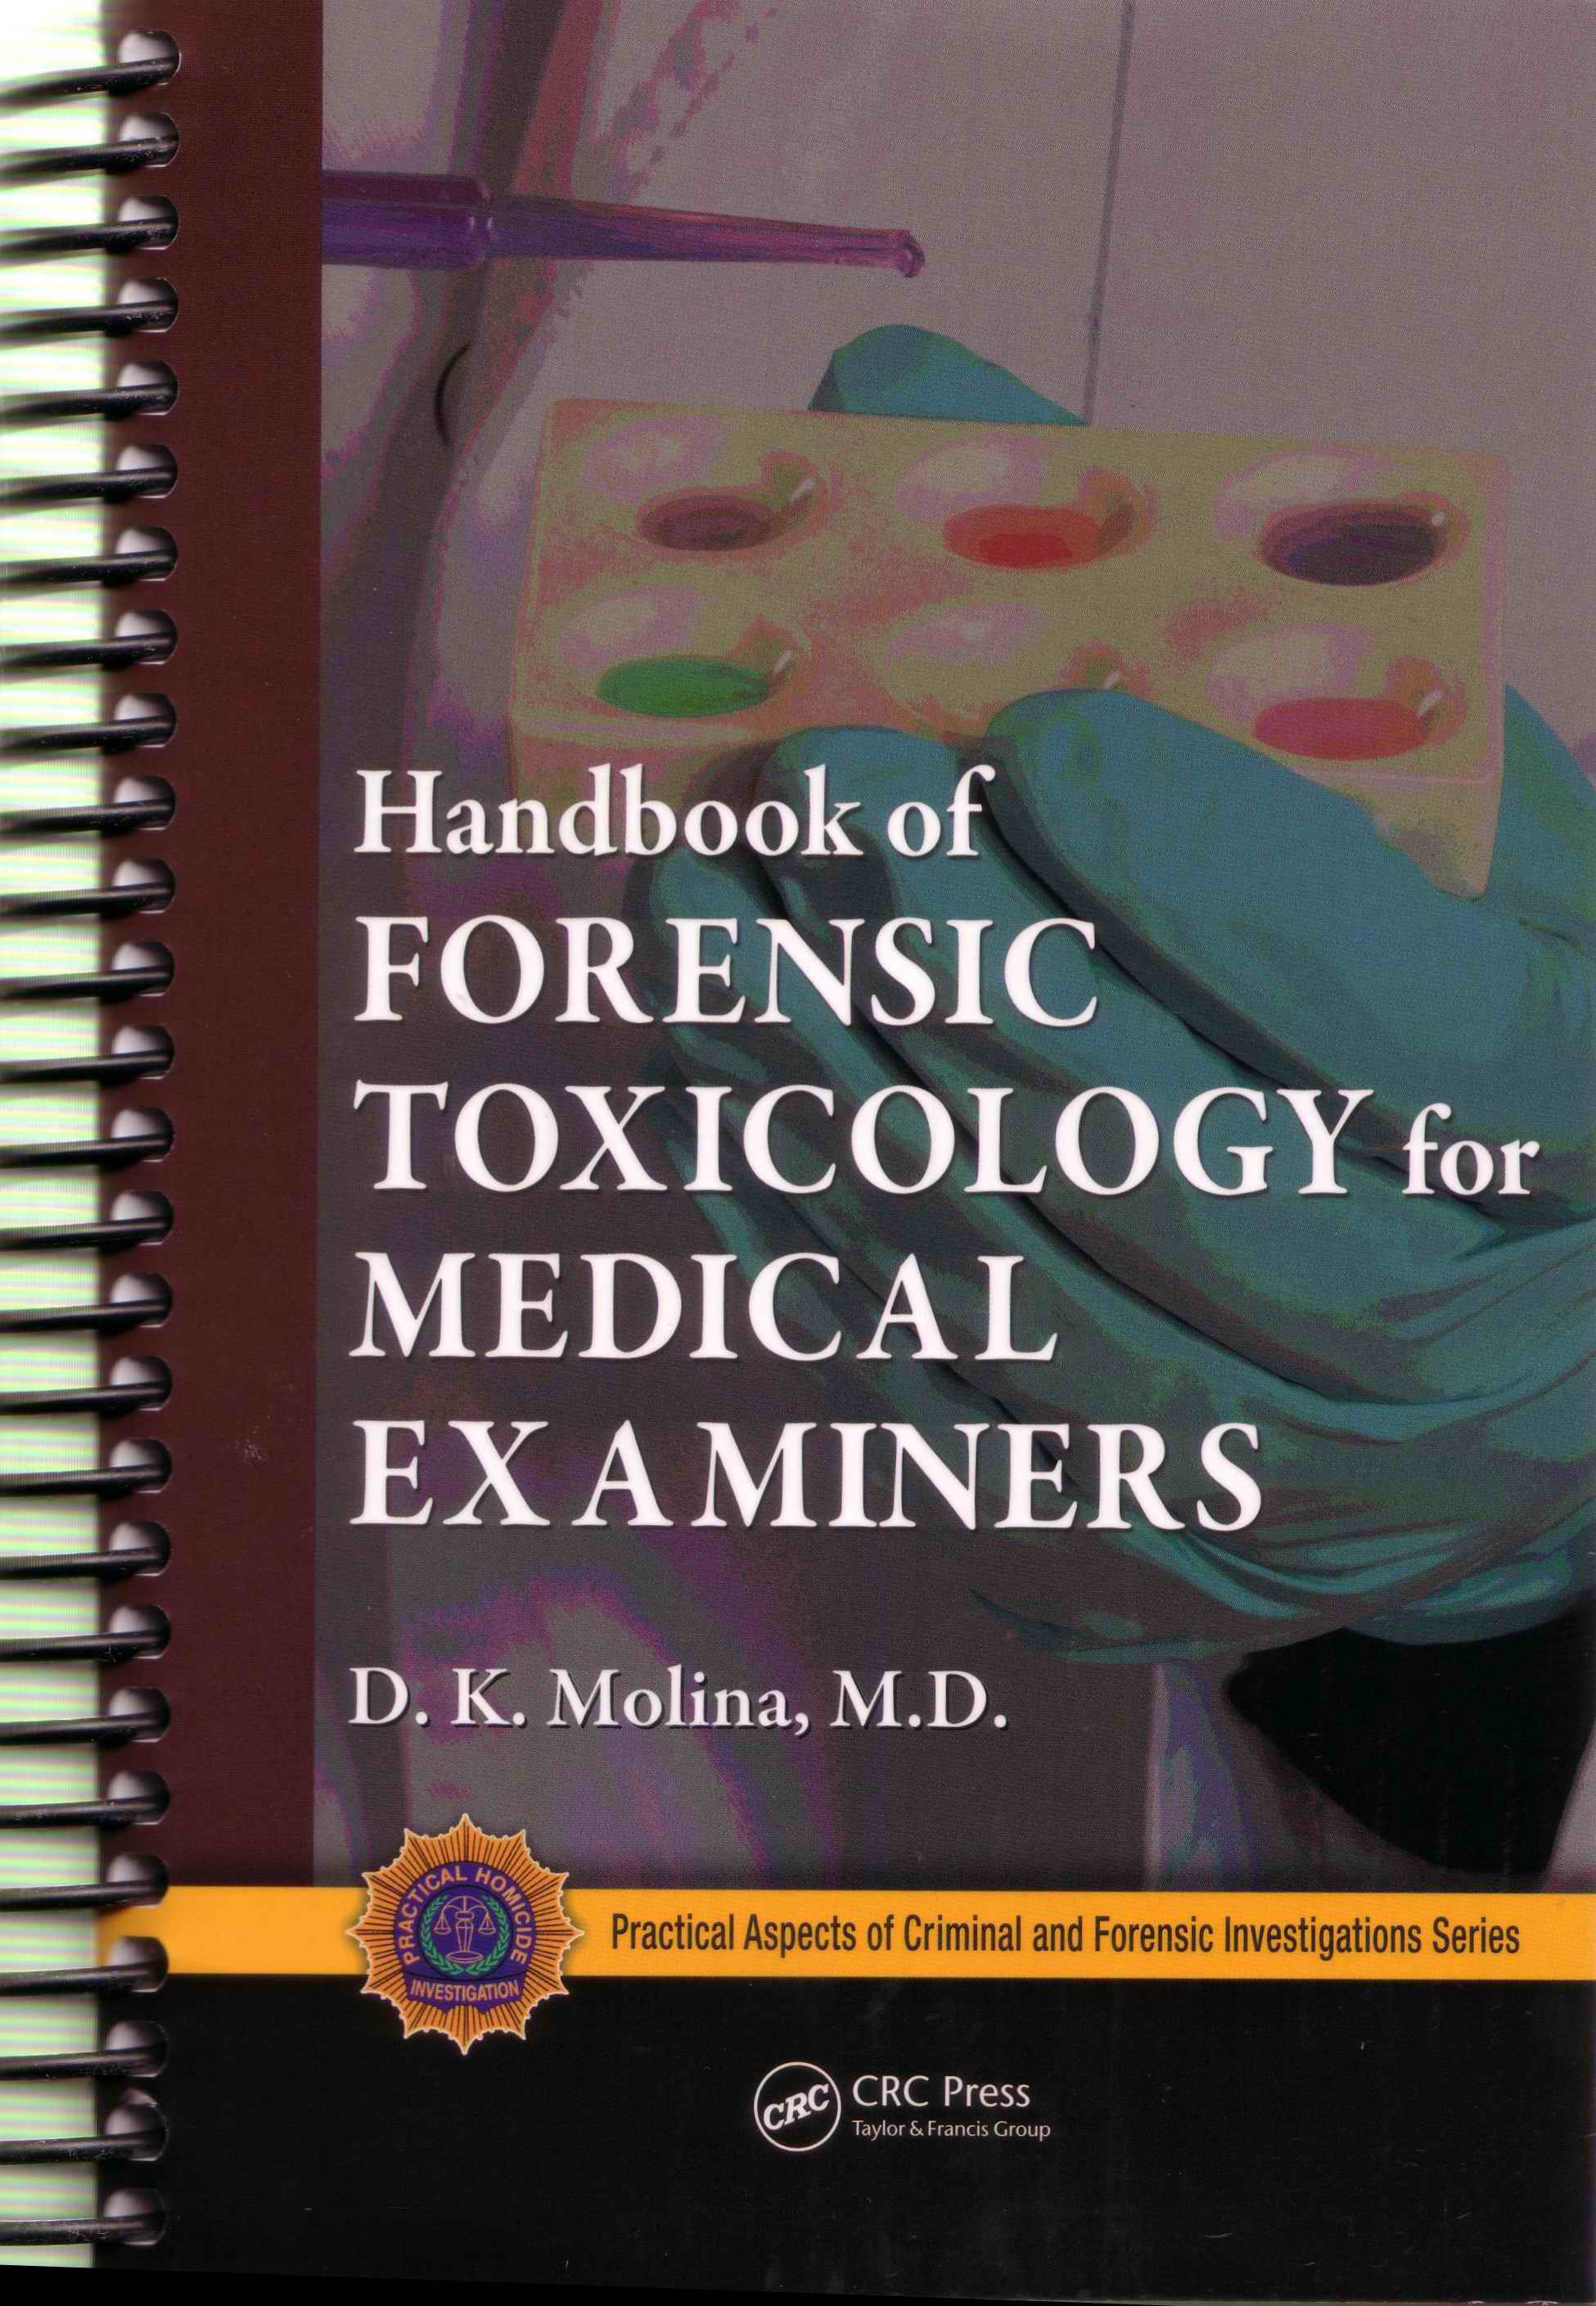 Handbook of Forensic Toxicology for Medical Examiners (From the series “Practical Aspects of Criminal & Forensic Investigations”) by D. K. Molina